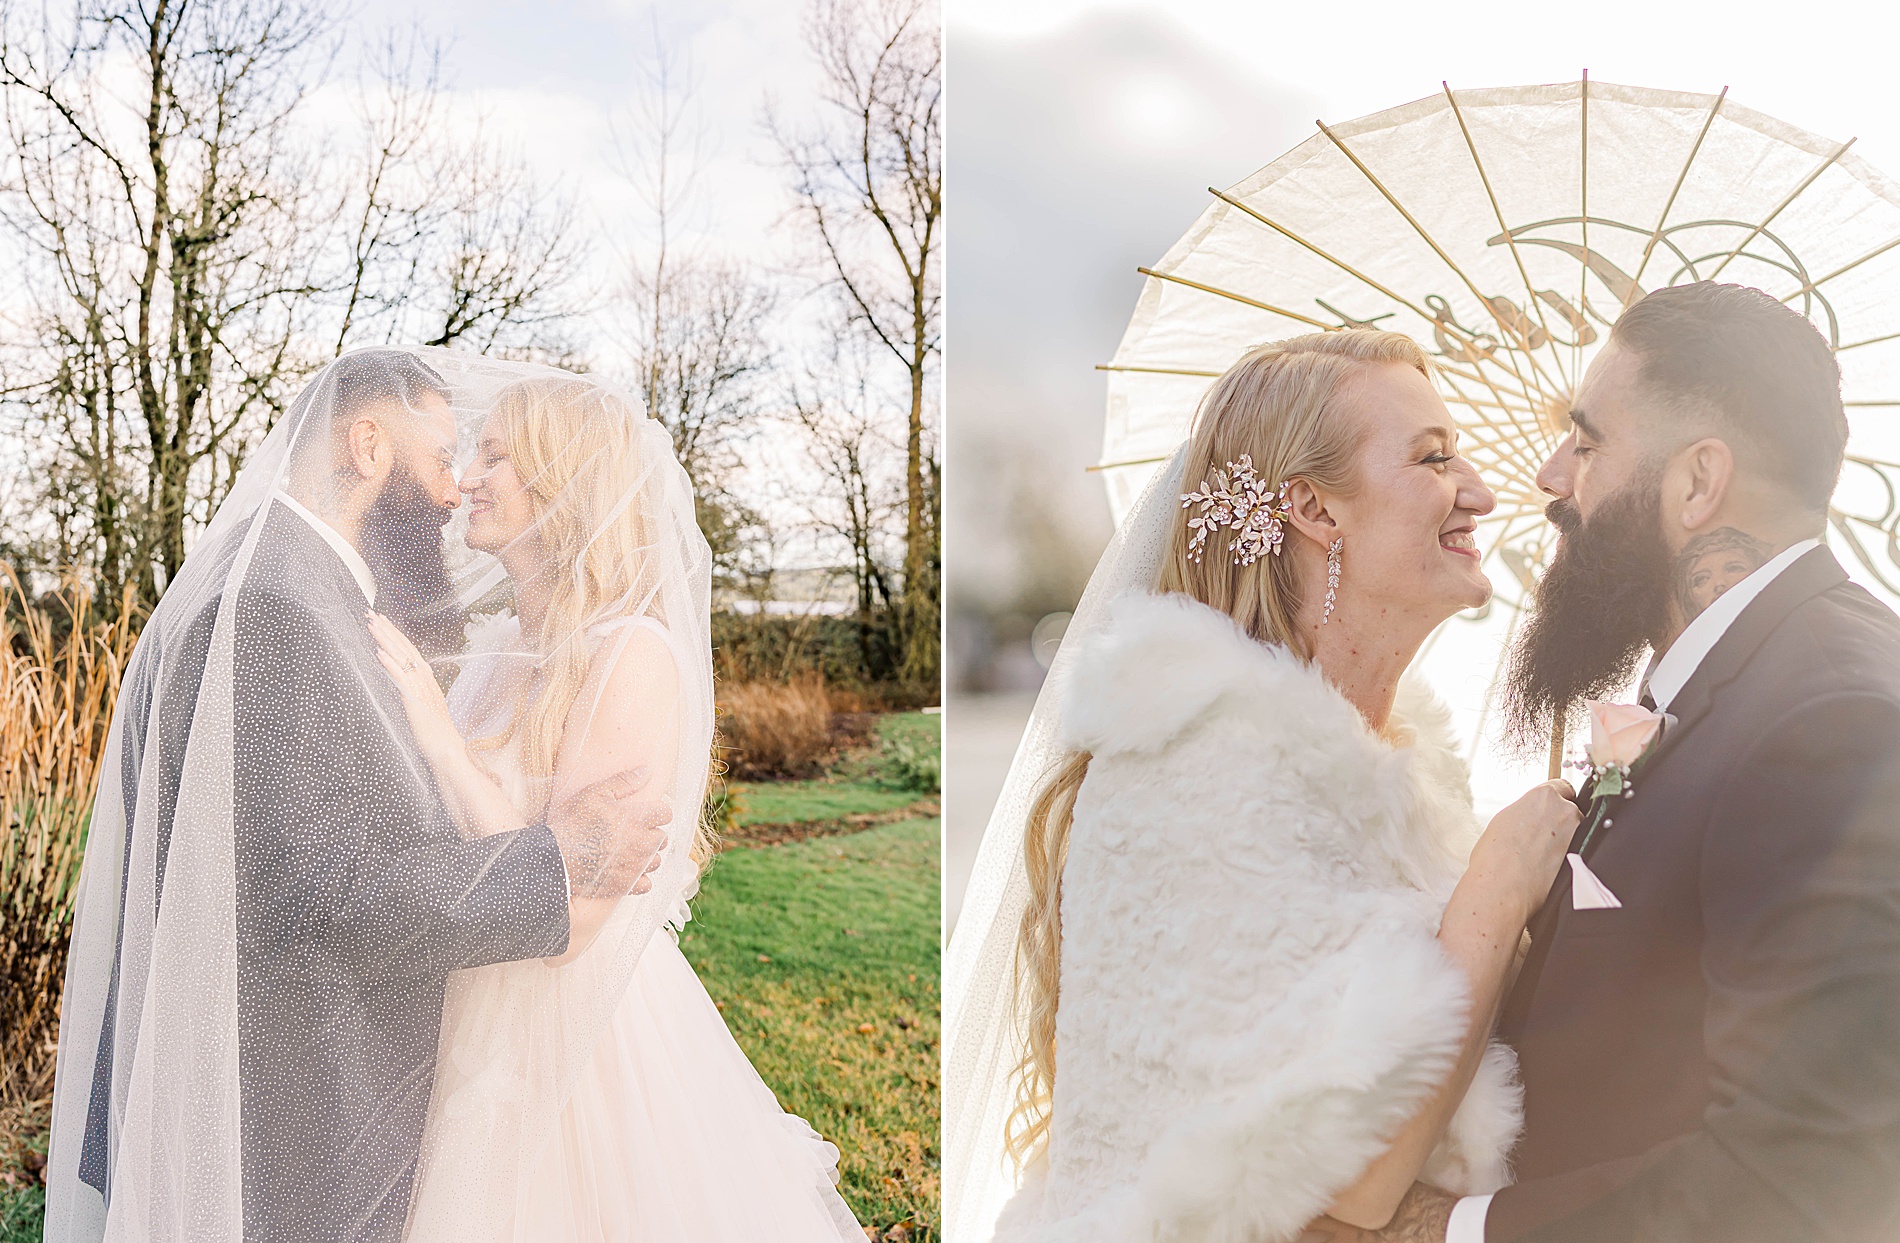 timeless wedding portraits of bride and groom from Romantic Winter Wedding